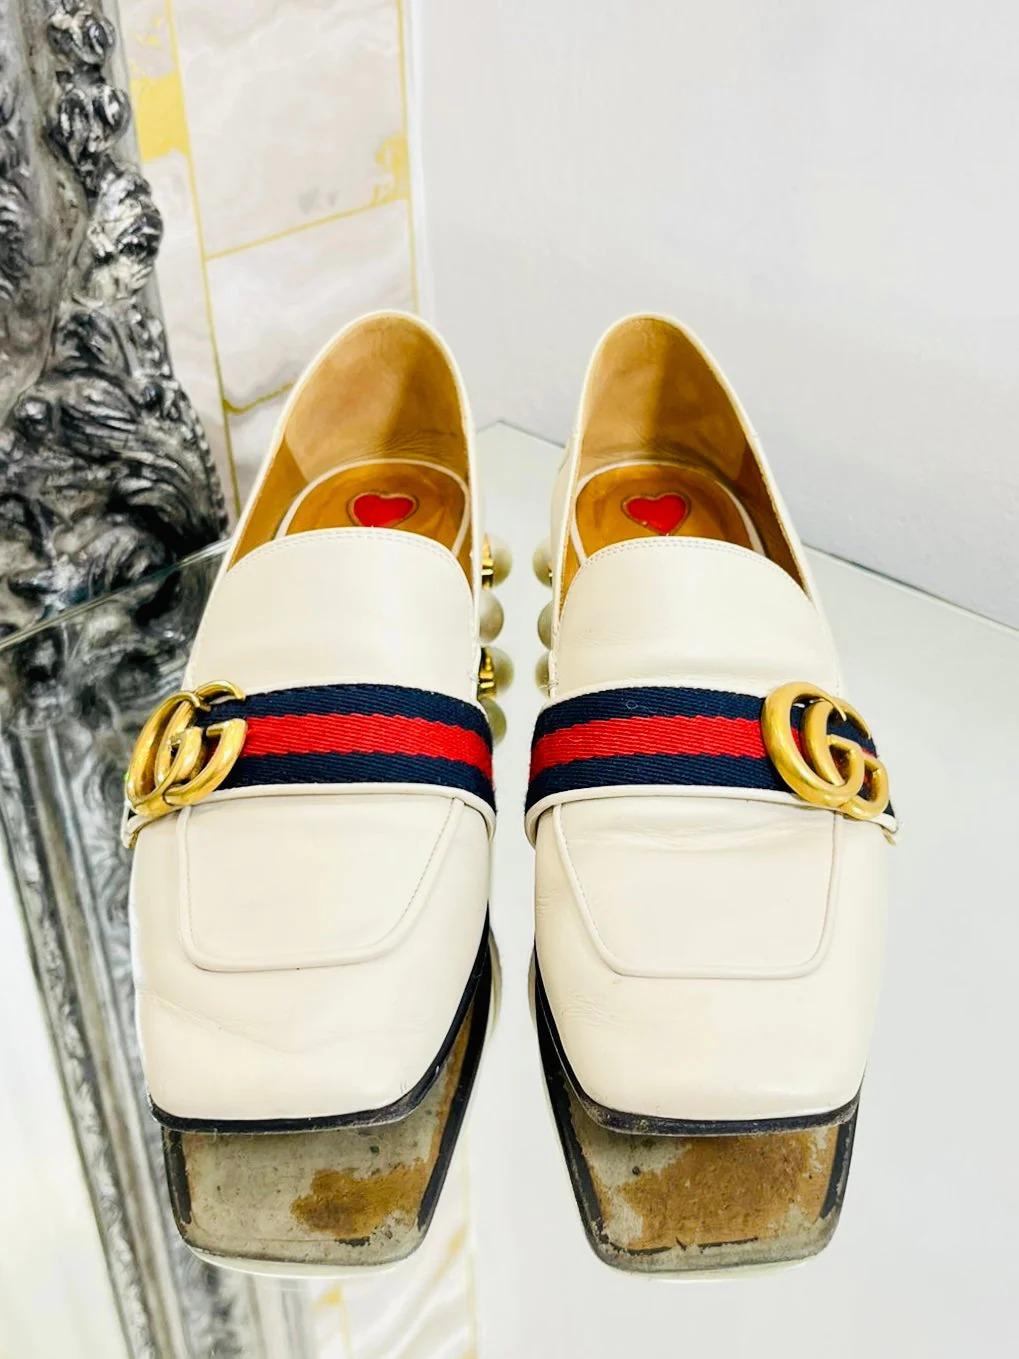 Gucci Leather & Pearl Loafer

Current season, 'GG' gold logo set on web strip. Midi heel with 'GG' logo pearls and studs. The back of the shoe can be worn up or down! Wear as  shoe or a mule!

Additional information:
Size – 36
Composition – Leather,